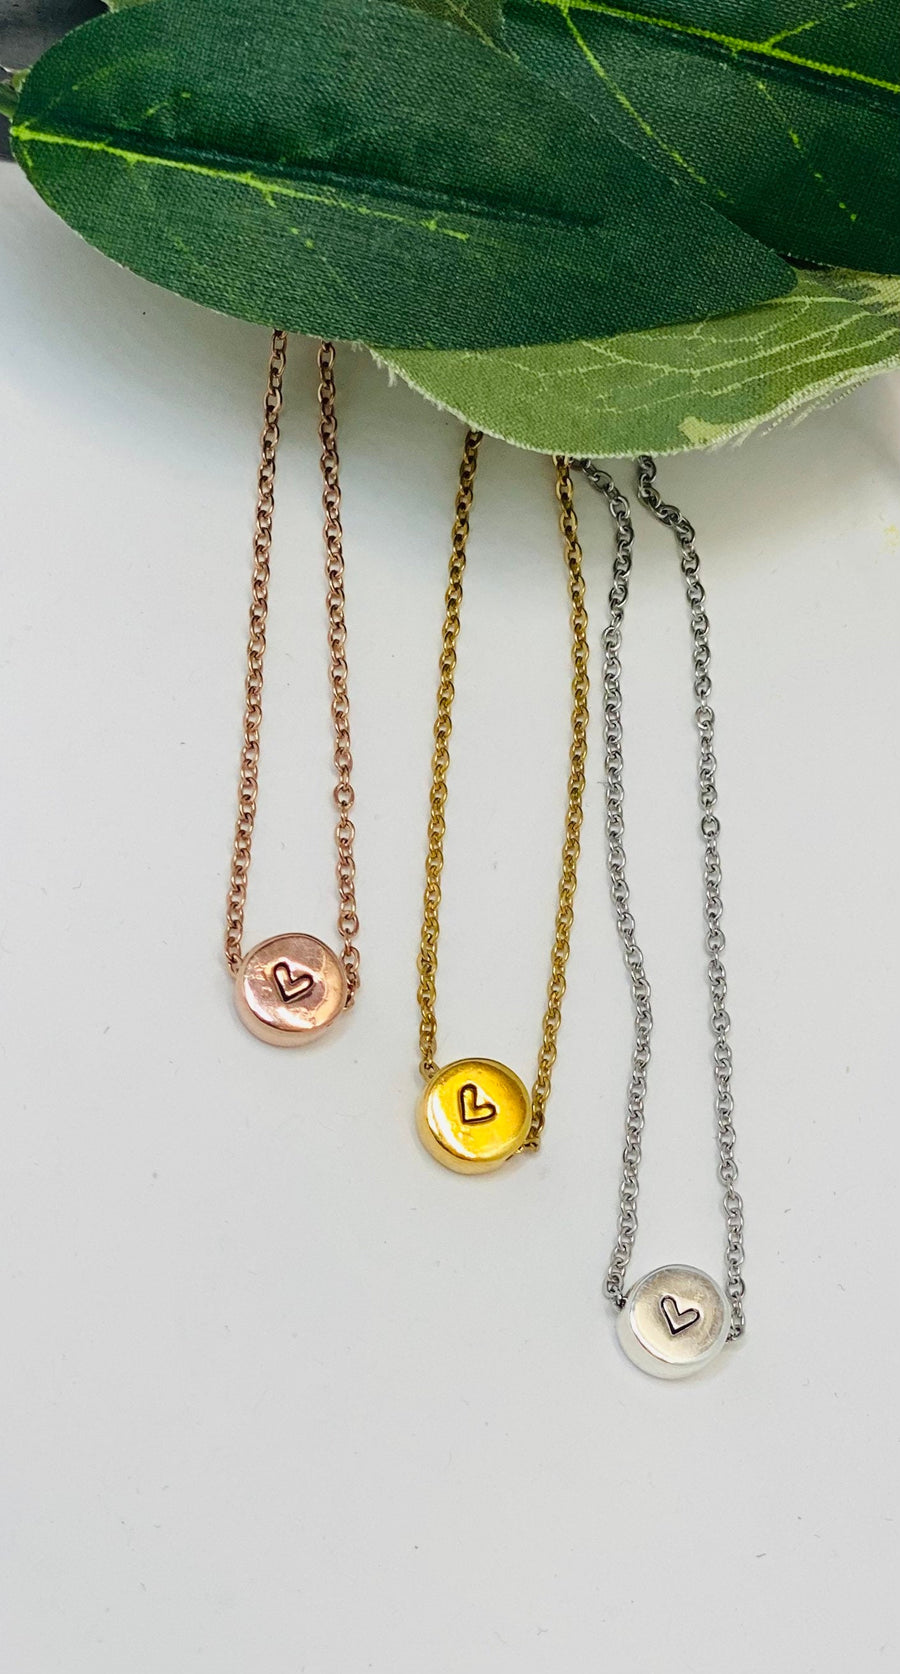 BFF Necklace, Personalized Name Necklace, Gift for Best Friend, Friend Gifts for women, Friend Quotes, Friend gift, Christmas Gift